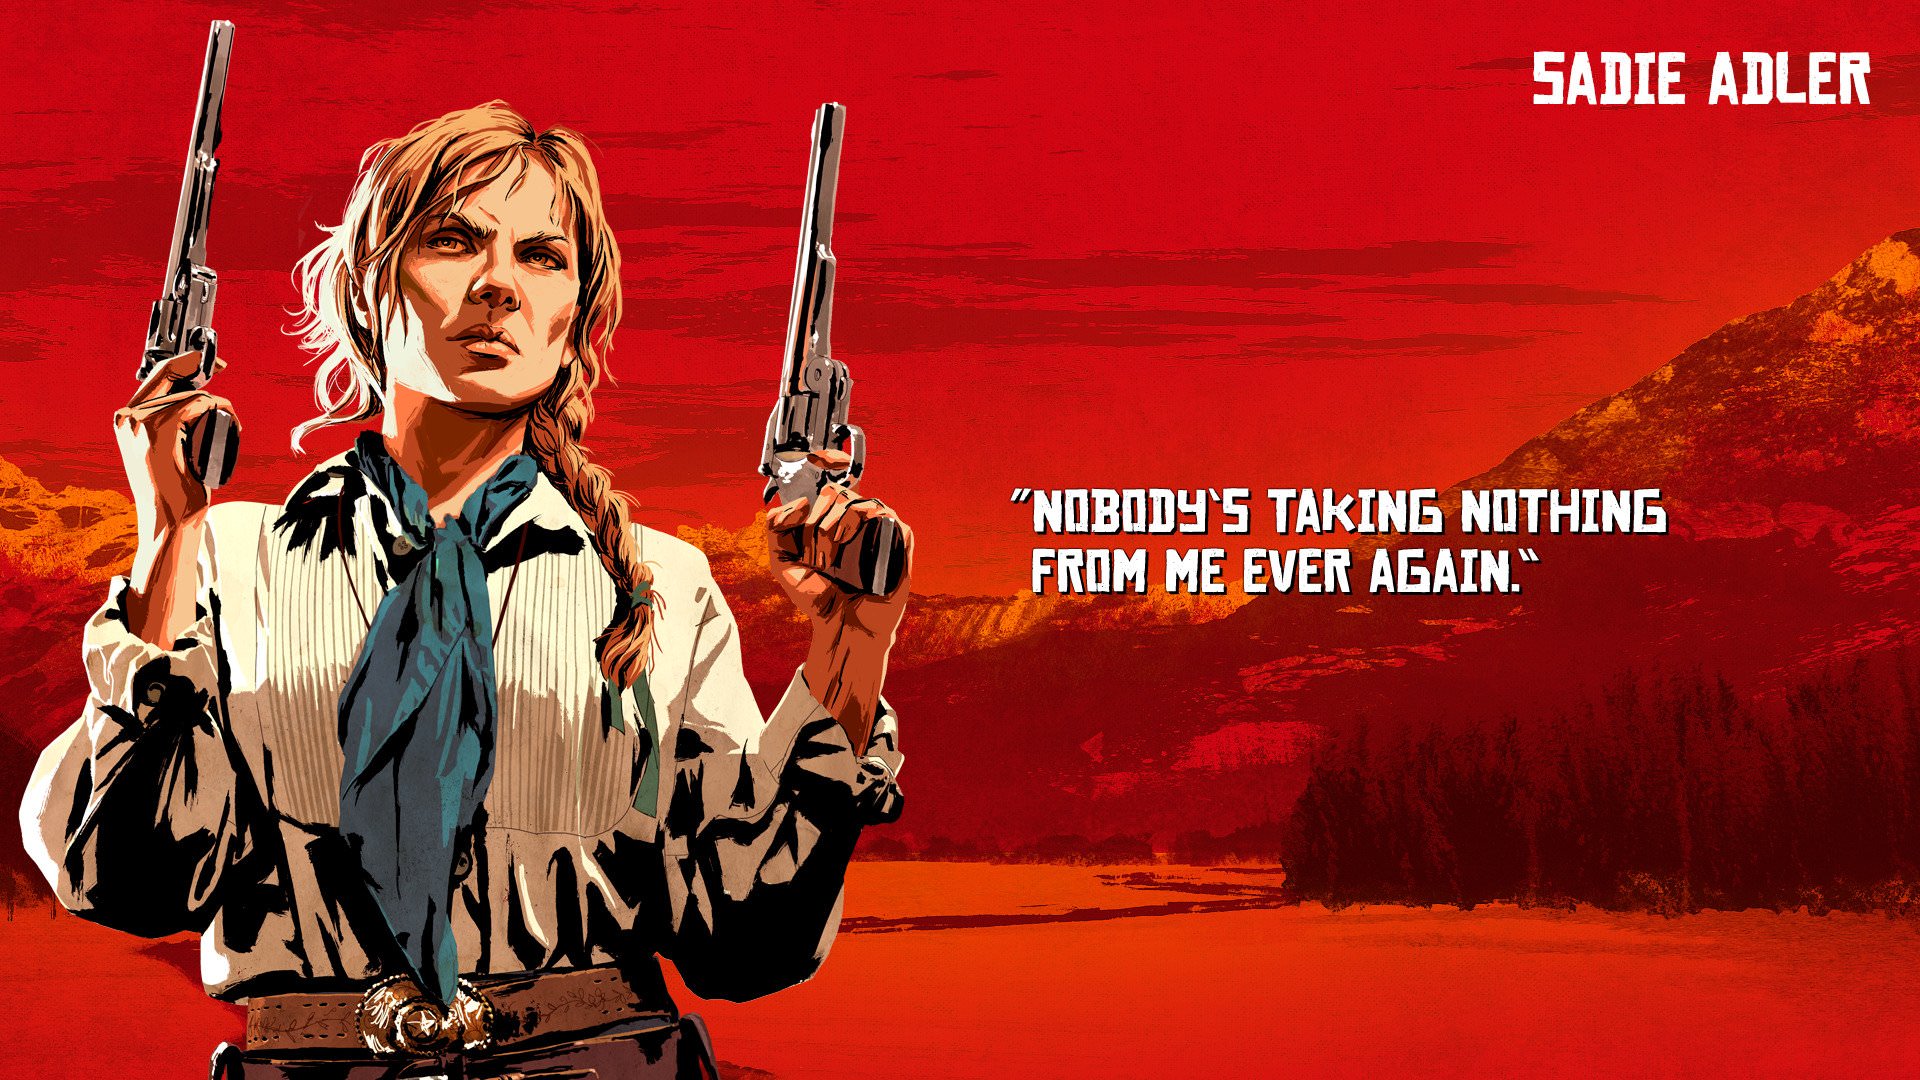 Twitter 上的 RSA @ cares? 🤷‍♂️："Red Dead Redemption character with quotes. 2/6 John Marston, Abigail Roberts, Jack Marston, Uncle. #RedDeadRedemption2 #RDR2 #RedDeadRedemption https://t.co/HNTq0ssJI7" / Twitter